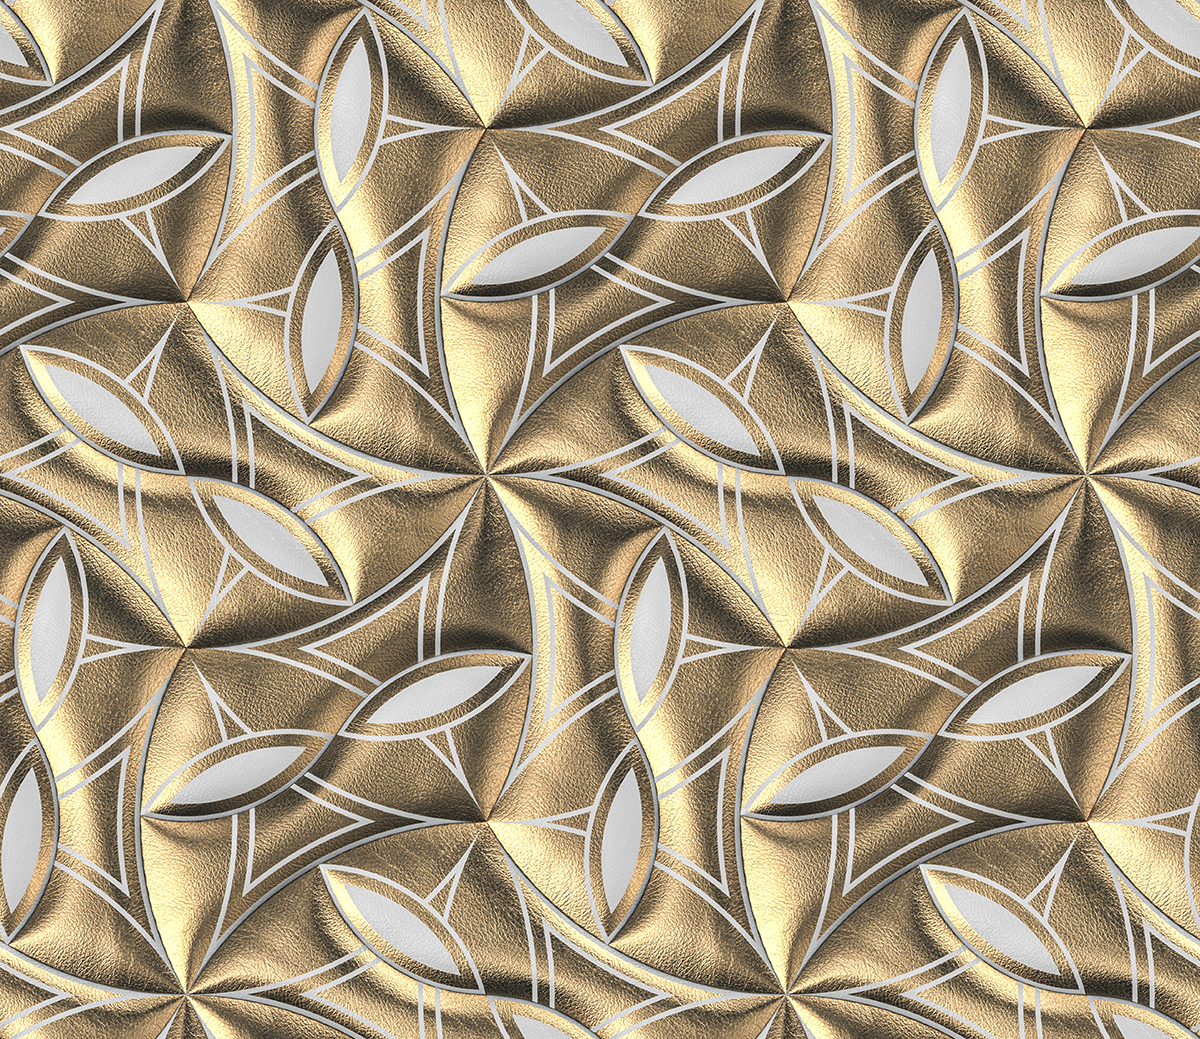 A gold and white patterned surface